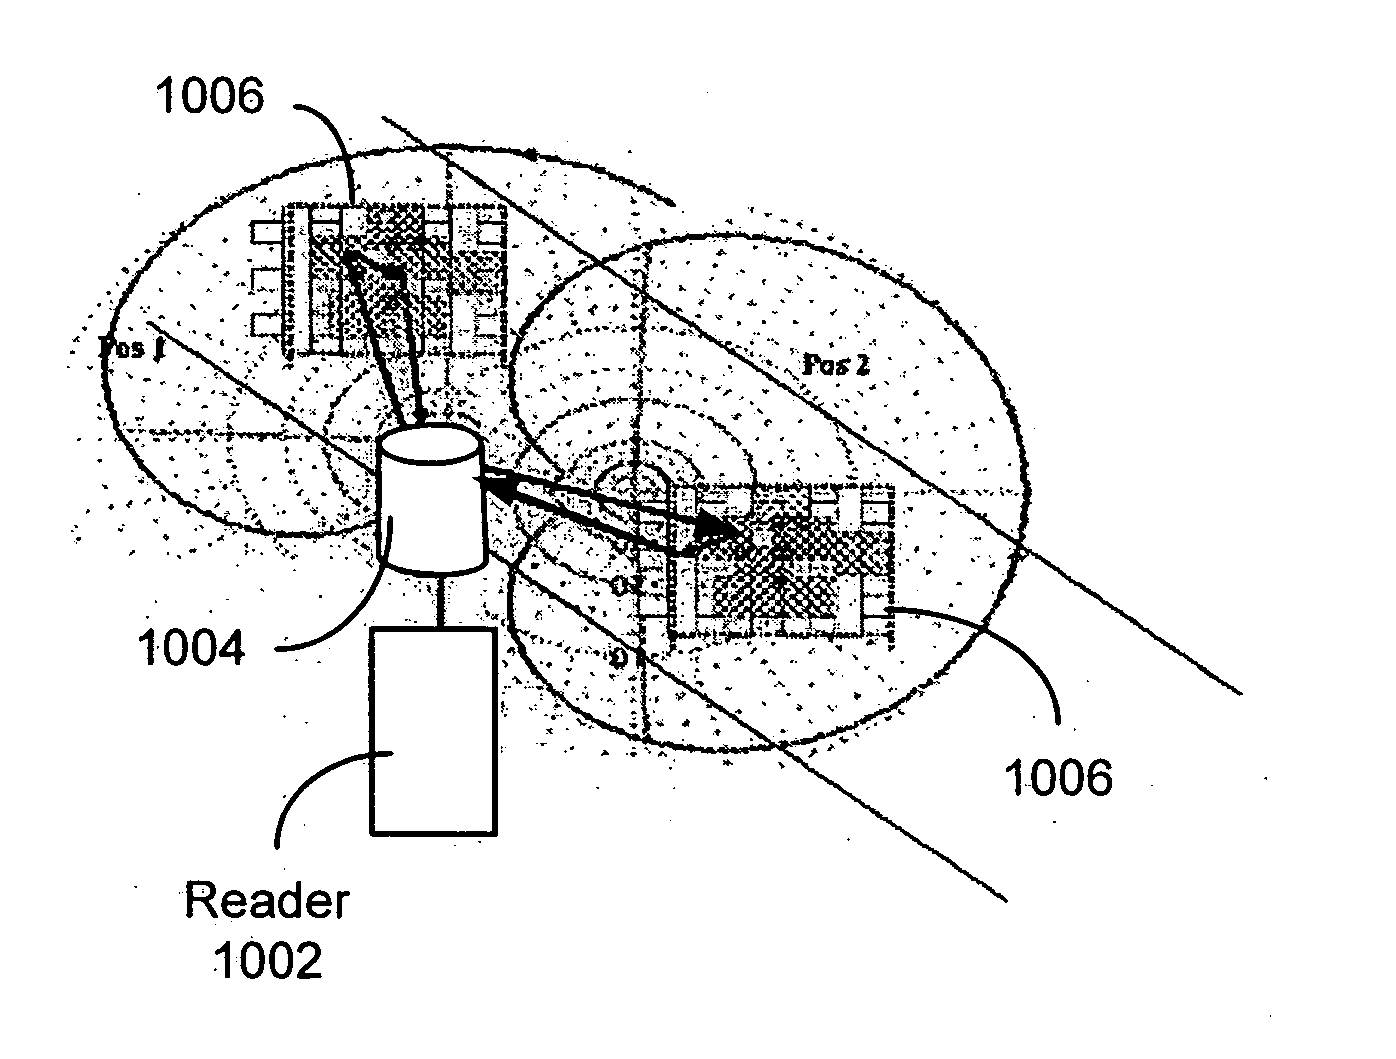 Scheduling in an RFID system having a coordinated RFID tag reader array